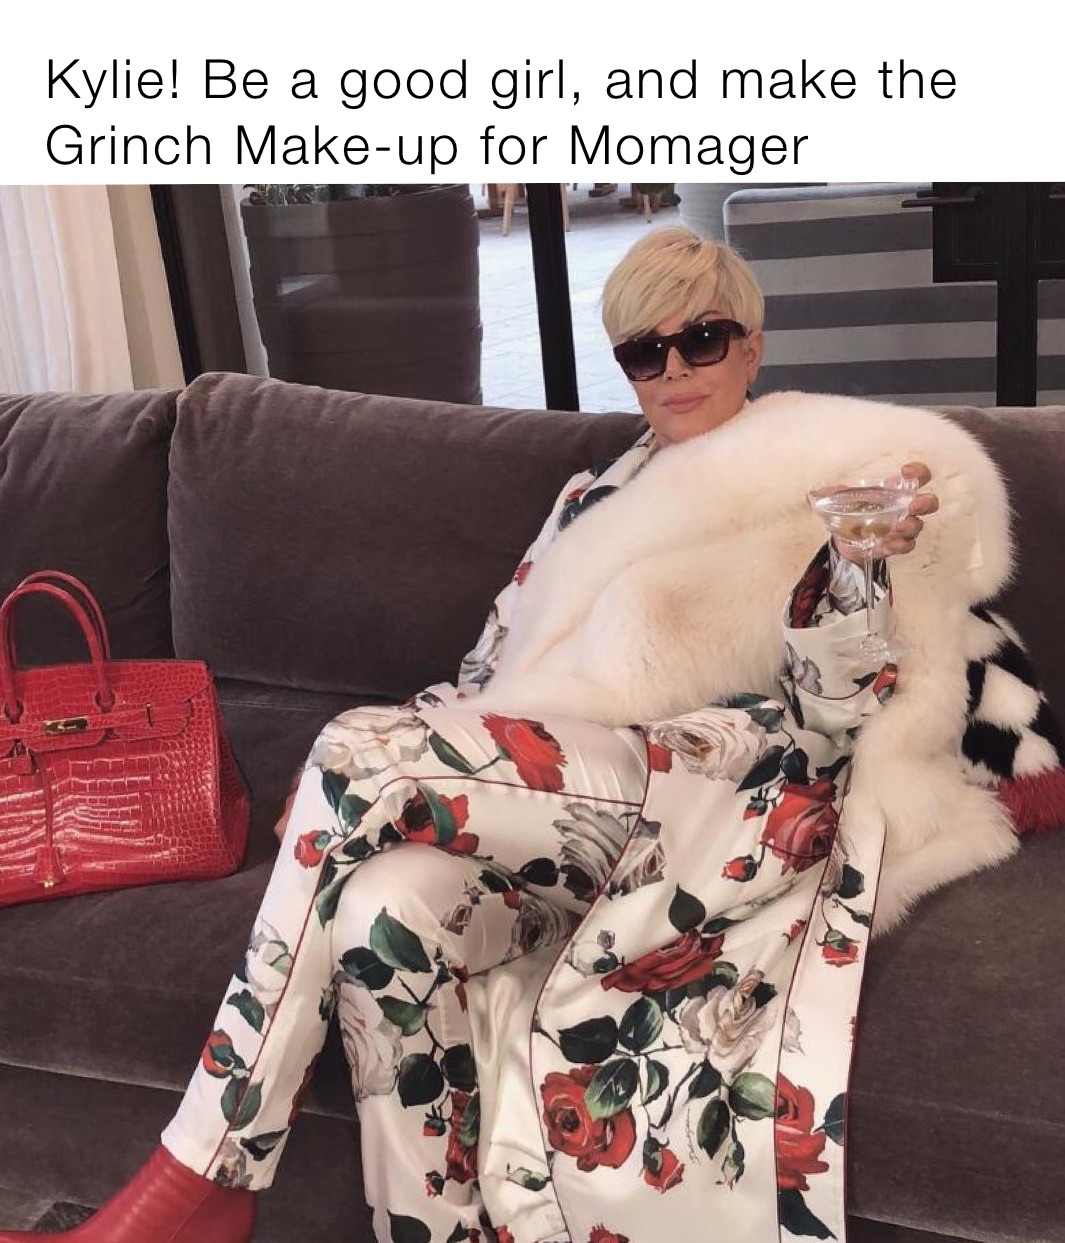 Kylie! Be a good girl, and make the Grinch Make-up for Momager 